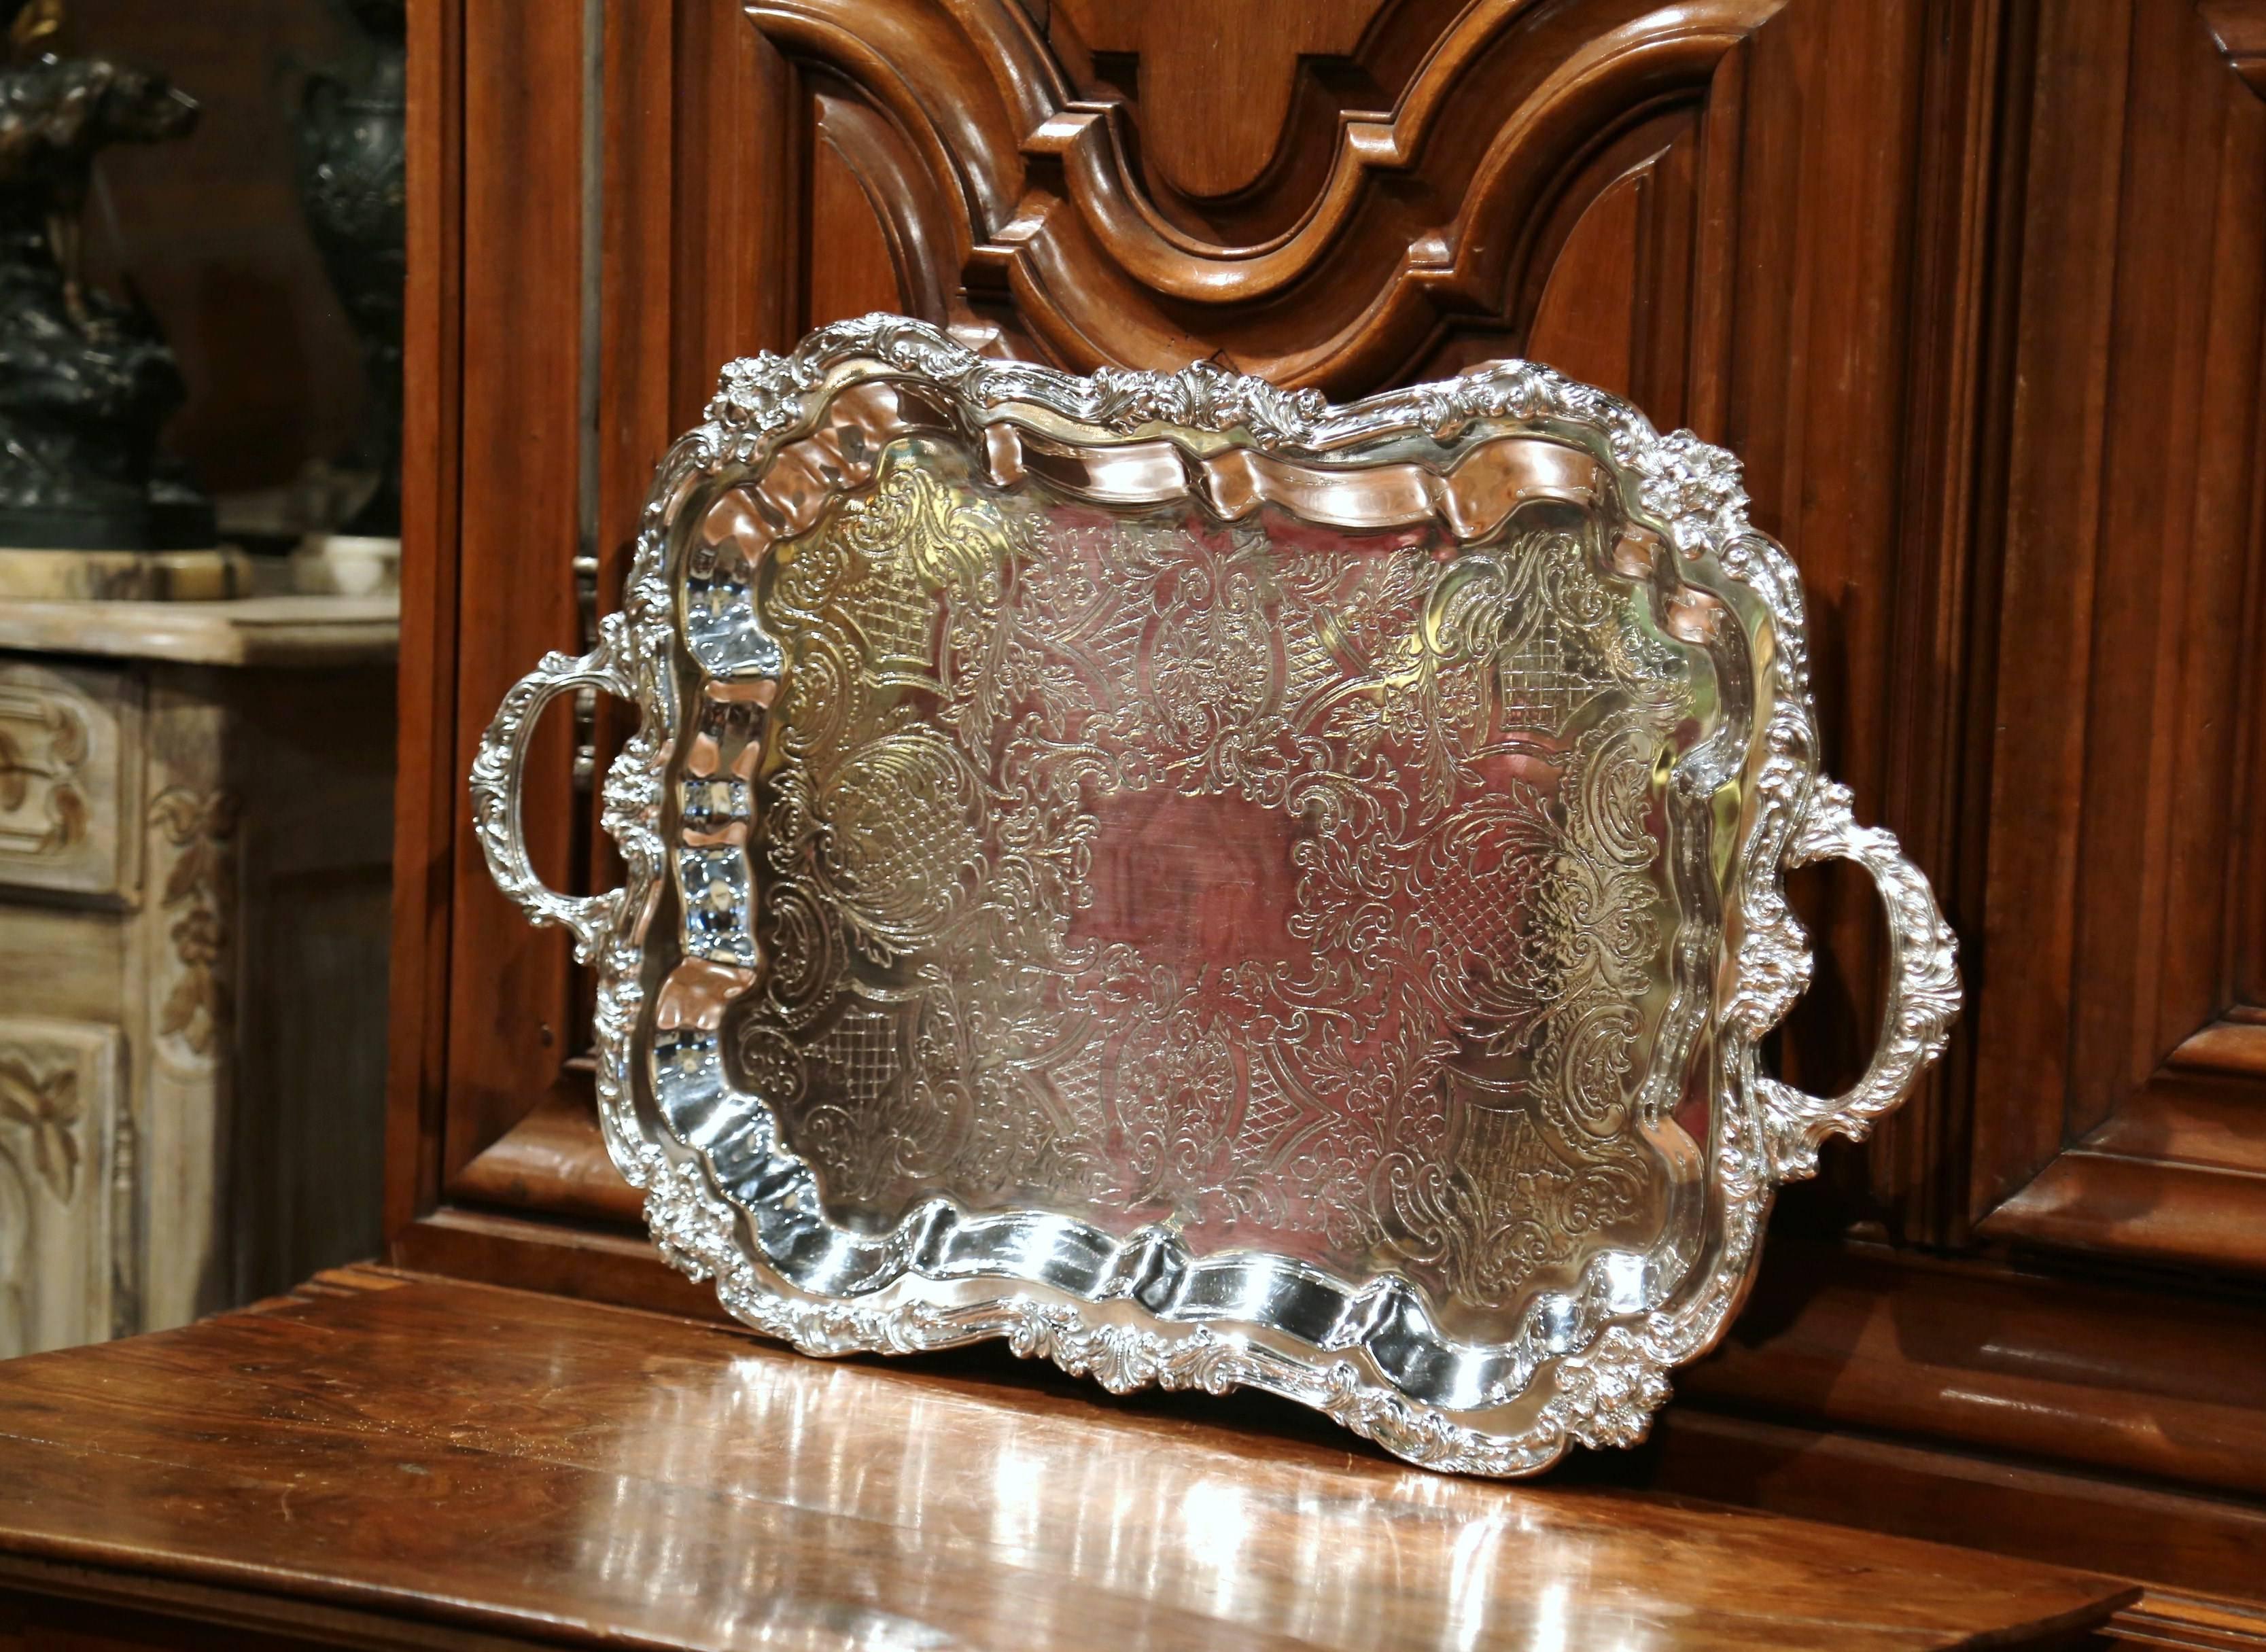 Elegant antique silver plated tray from France, crafted circa 1920, the decorative tray sits on four curved feet and features ornate handles on the sides, elaborate scrolls around the perimeter and engraved decor on the surface top. The piece is in